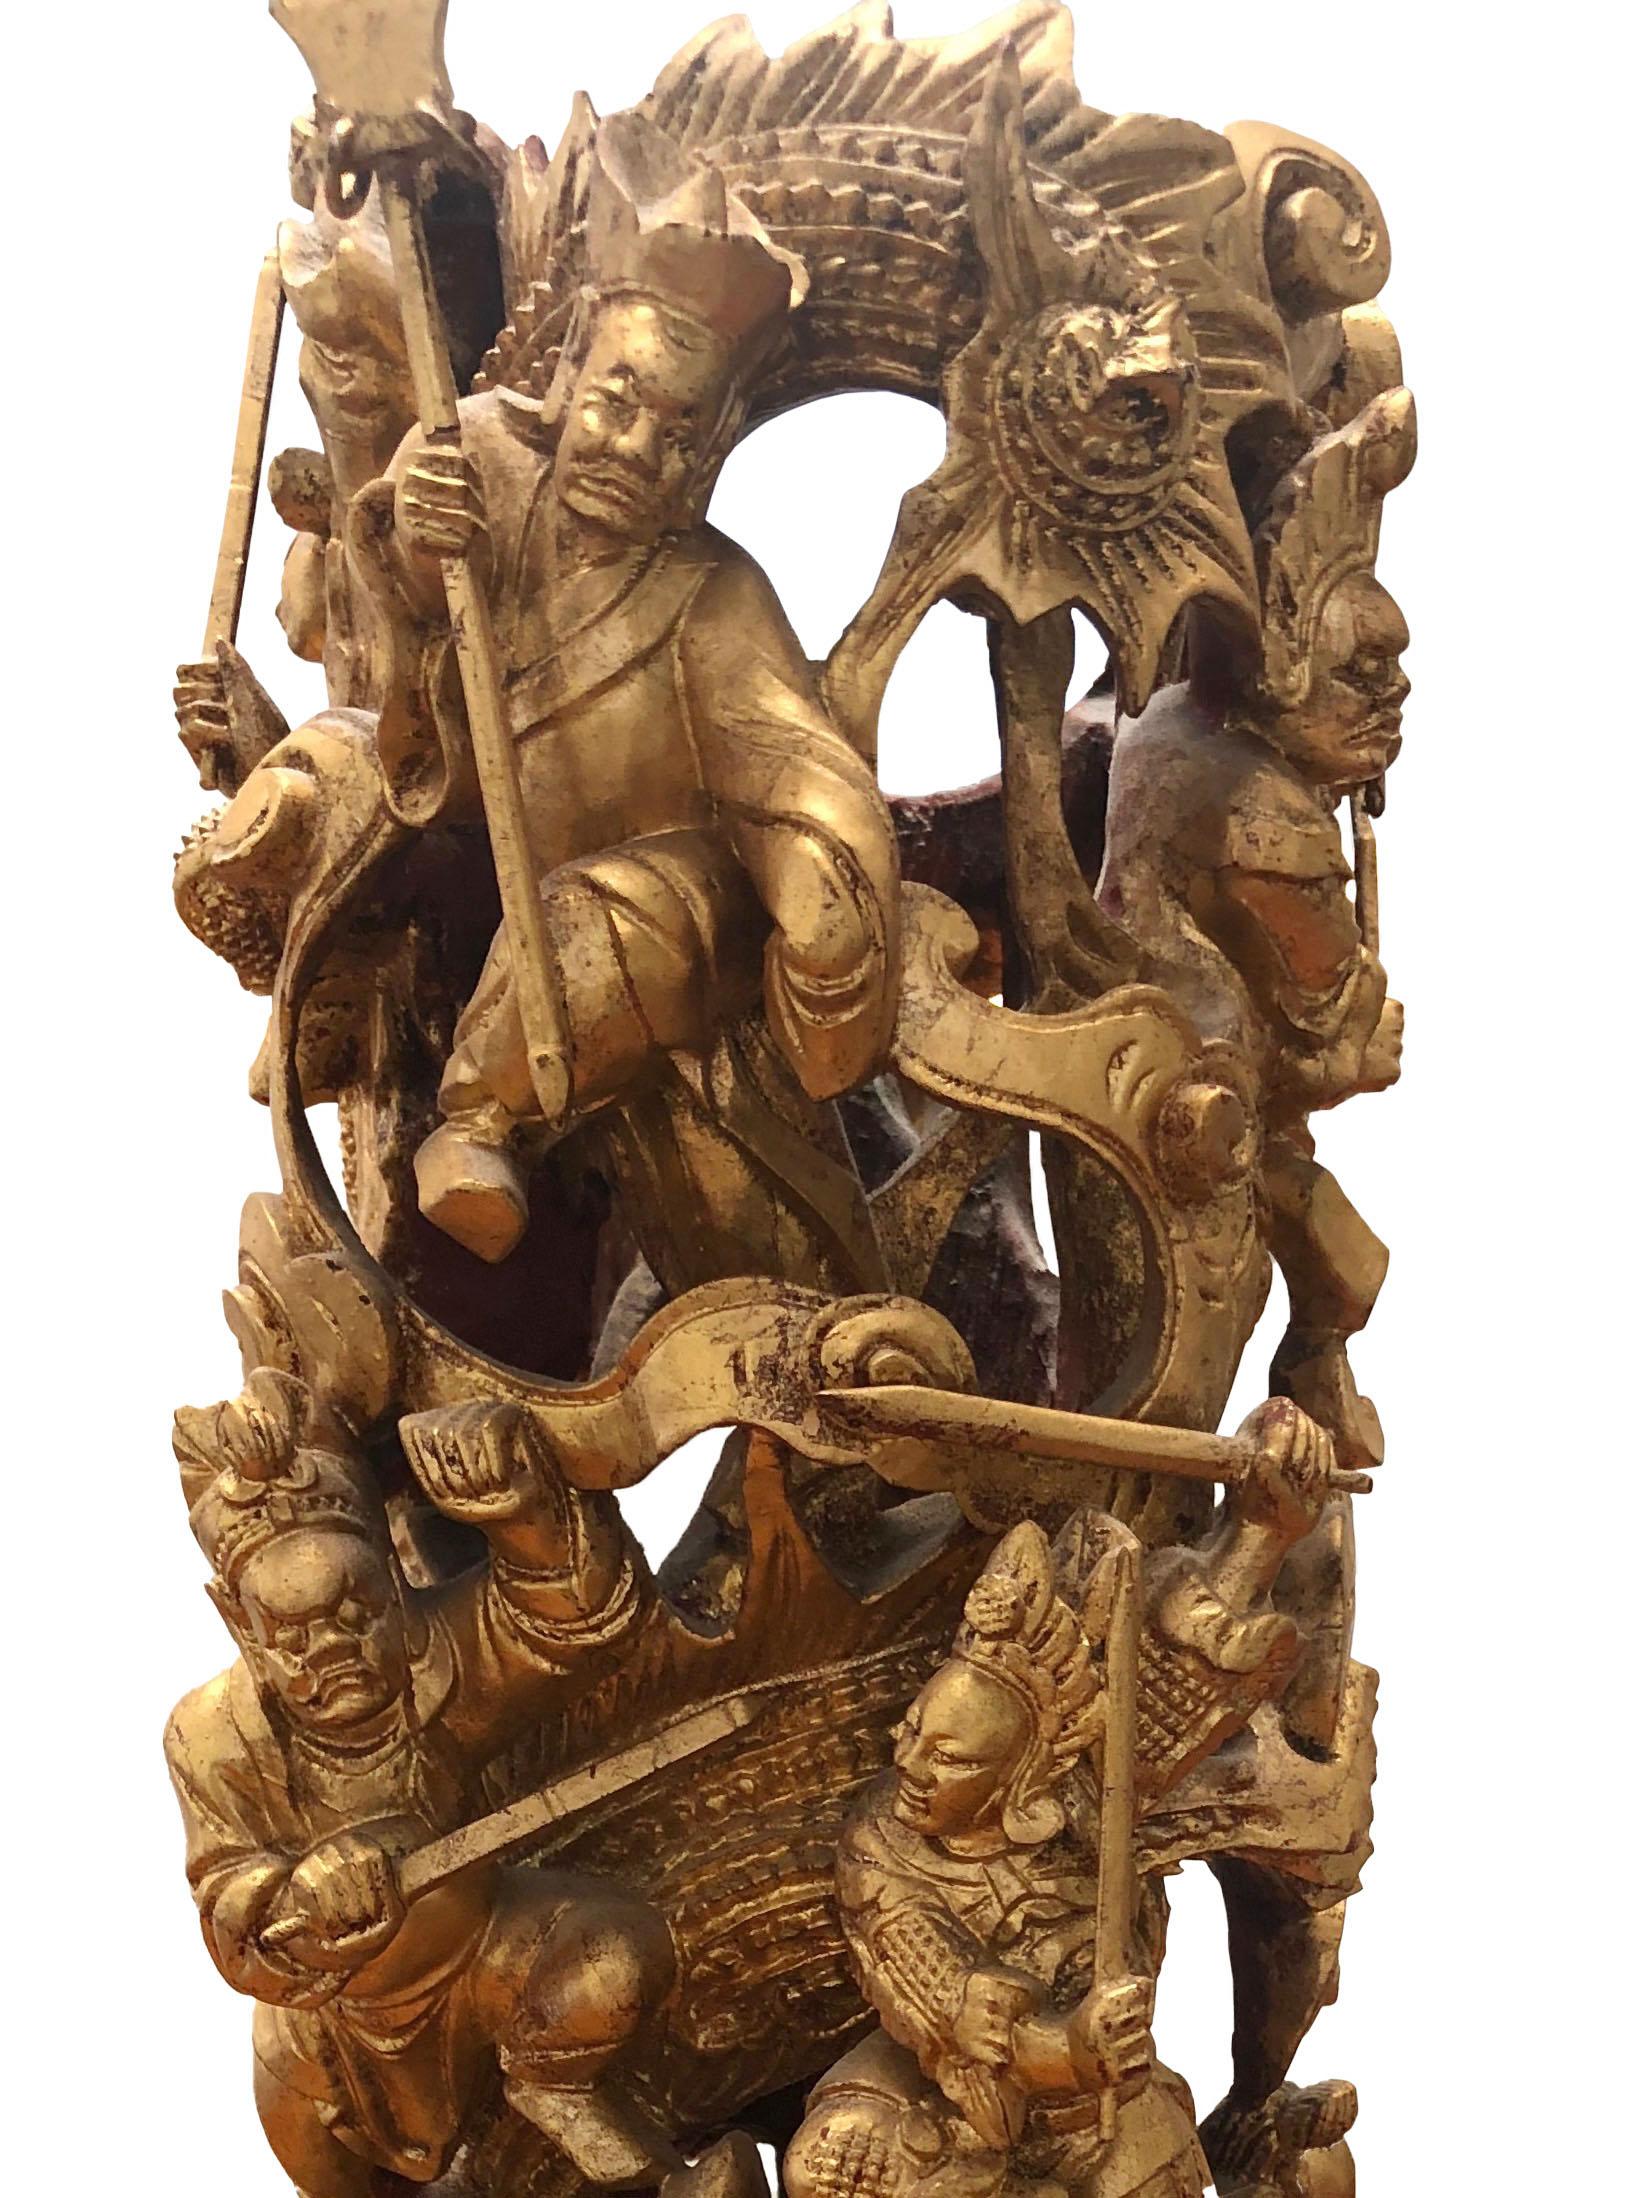 A fabulous 18th century Chinese hand carved fragment with warriors. Carved all the way around and has a period wooden stand. A remarkable work of art, spectacular. The art piece is 14.5